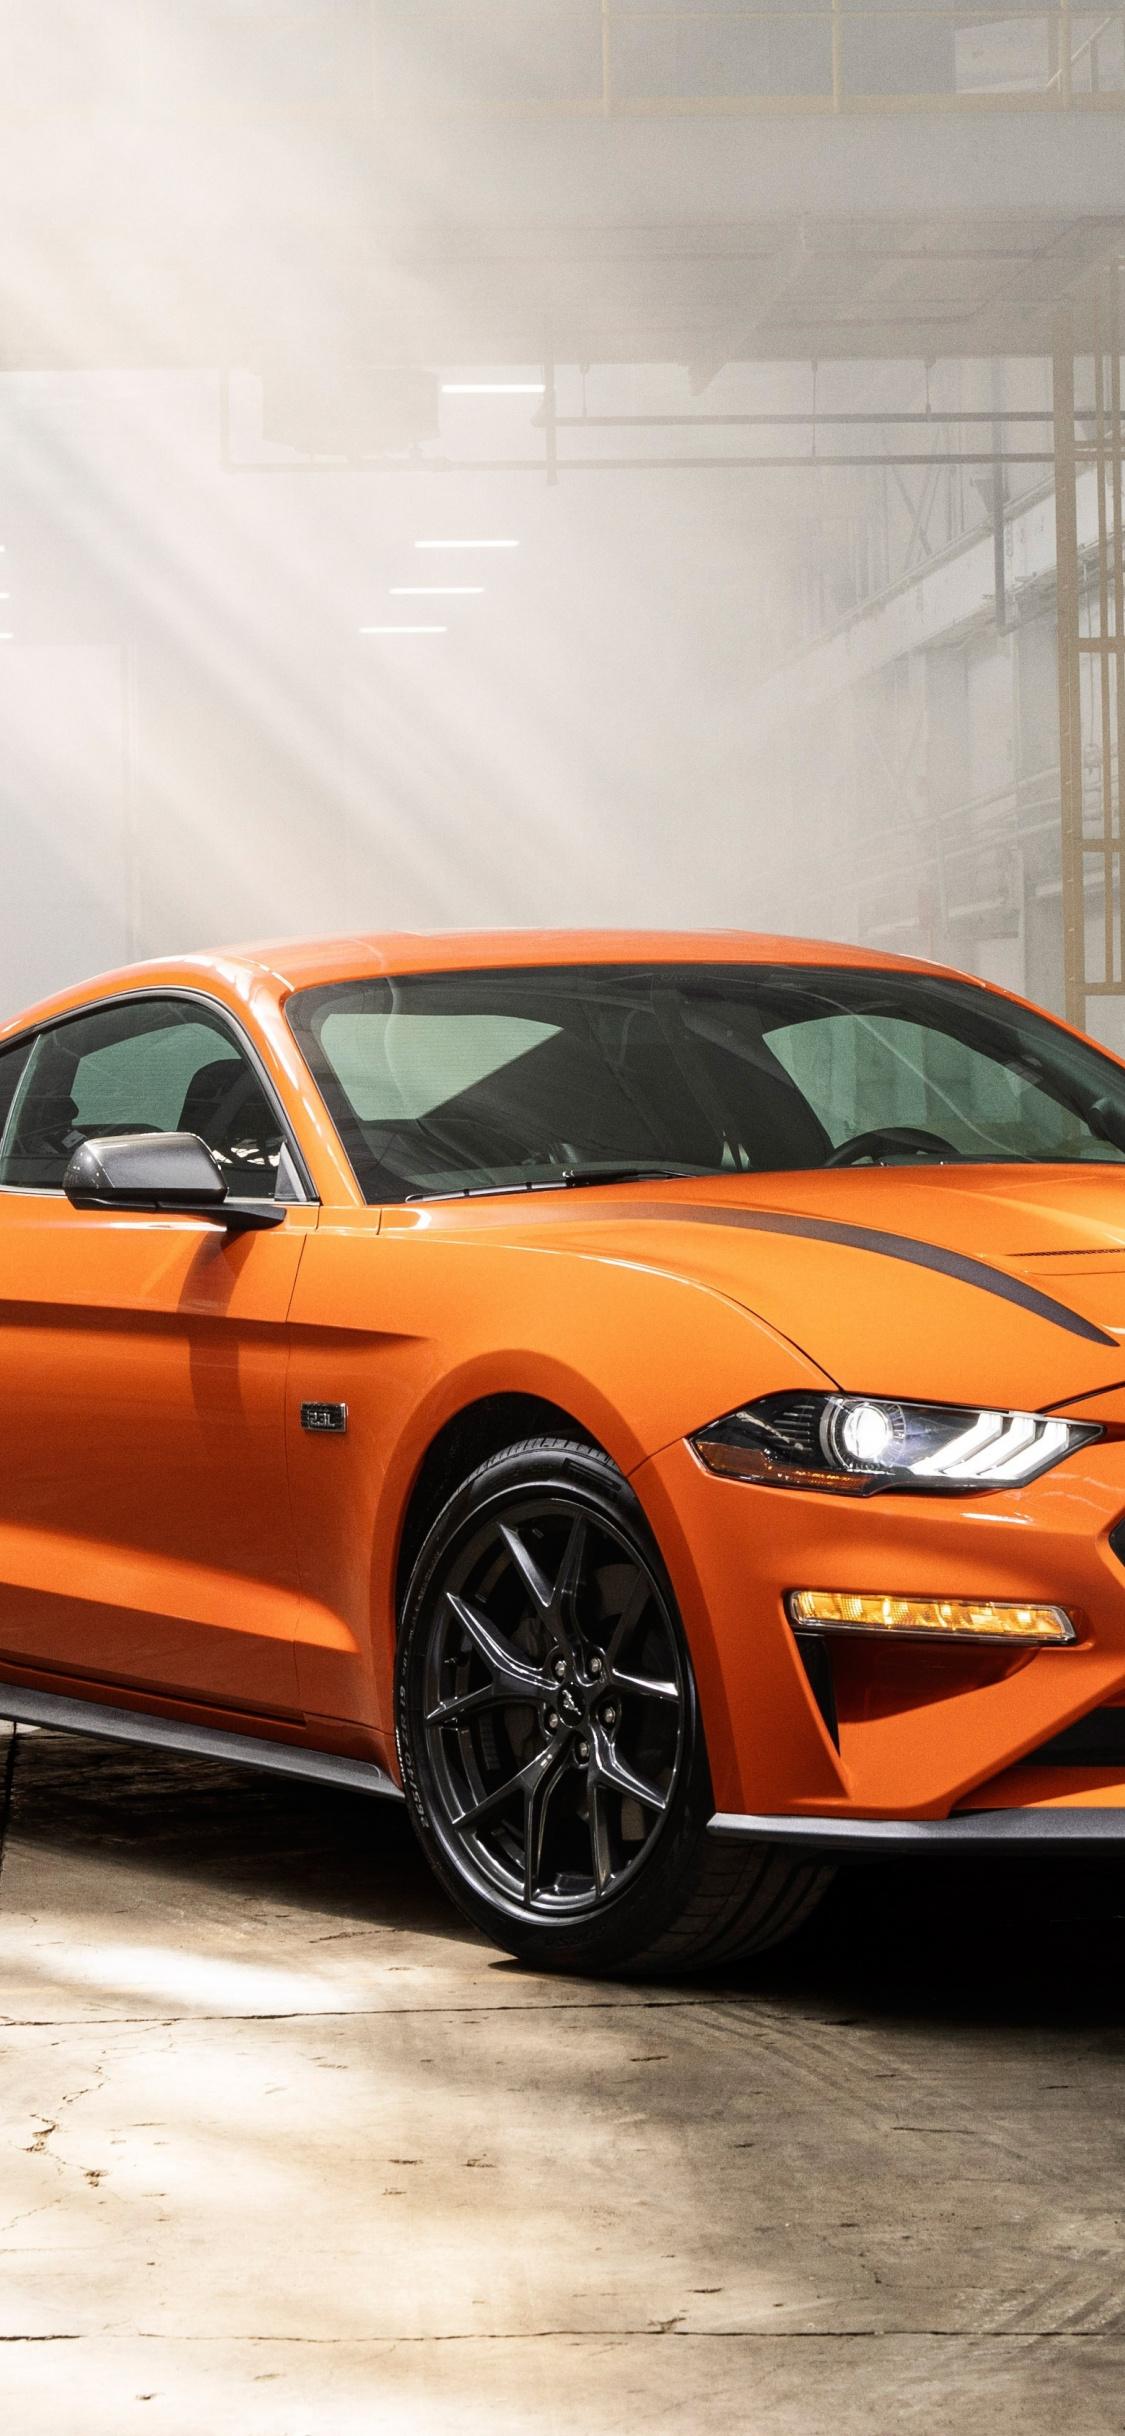 Download 1125x2436 wallpapers ford mustang ecoboost, high